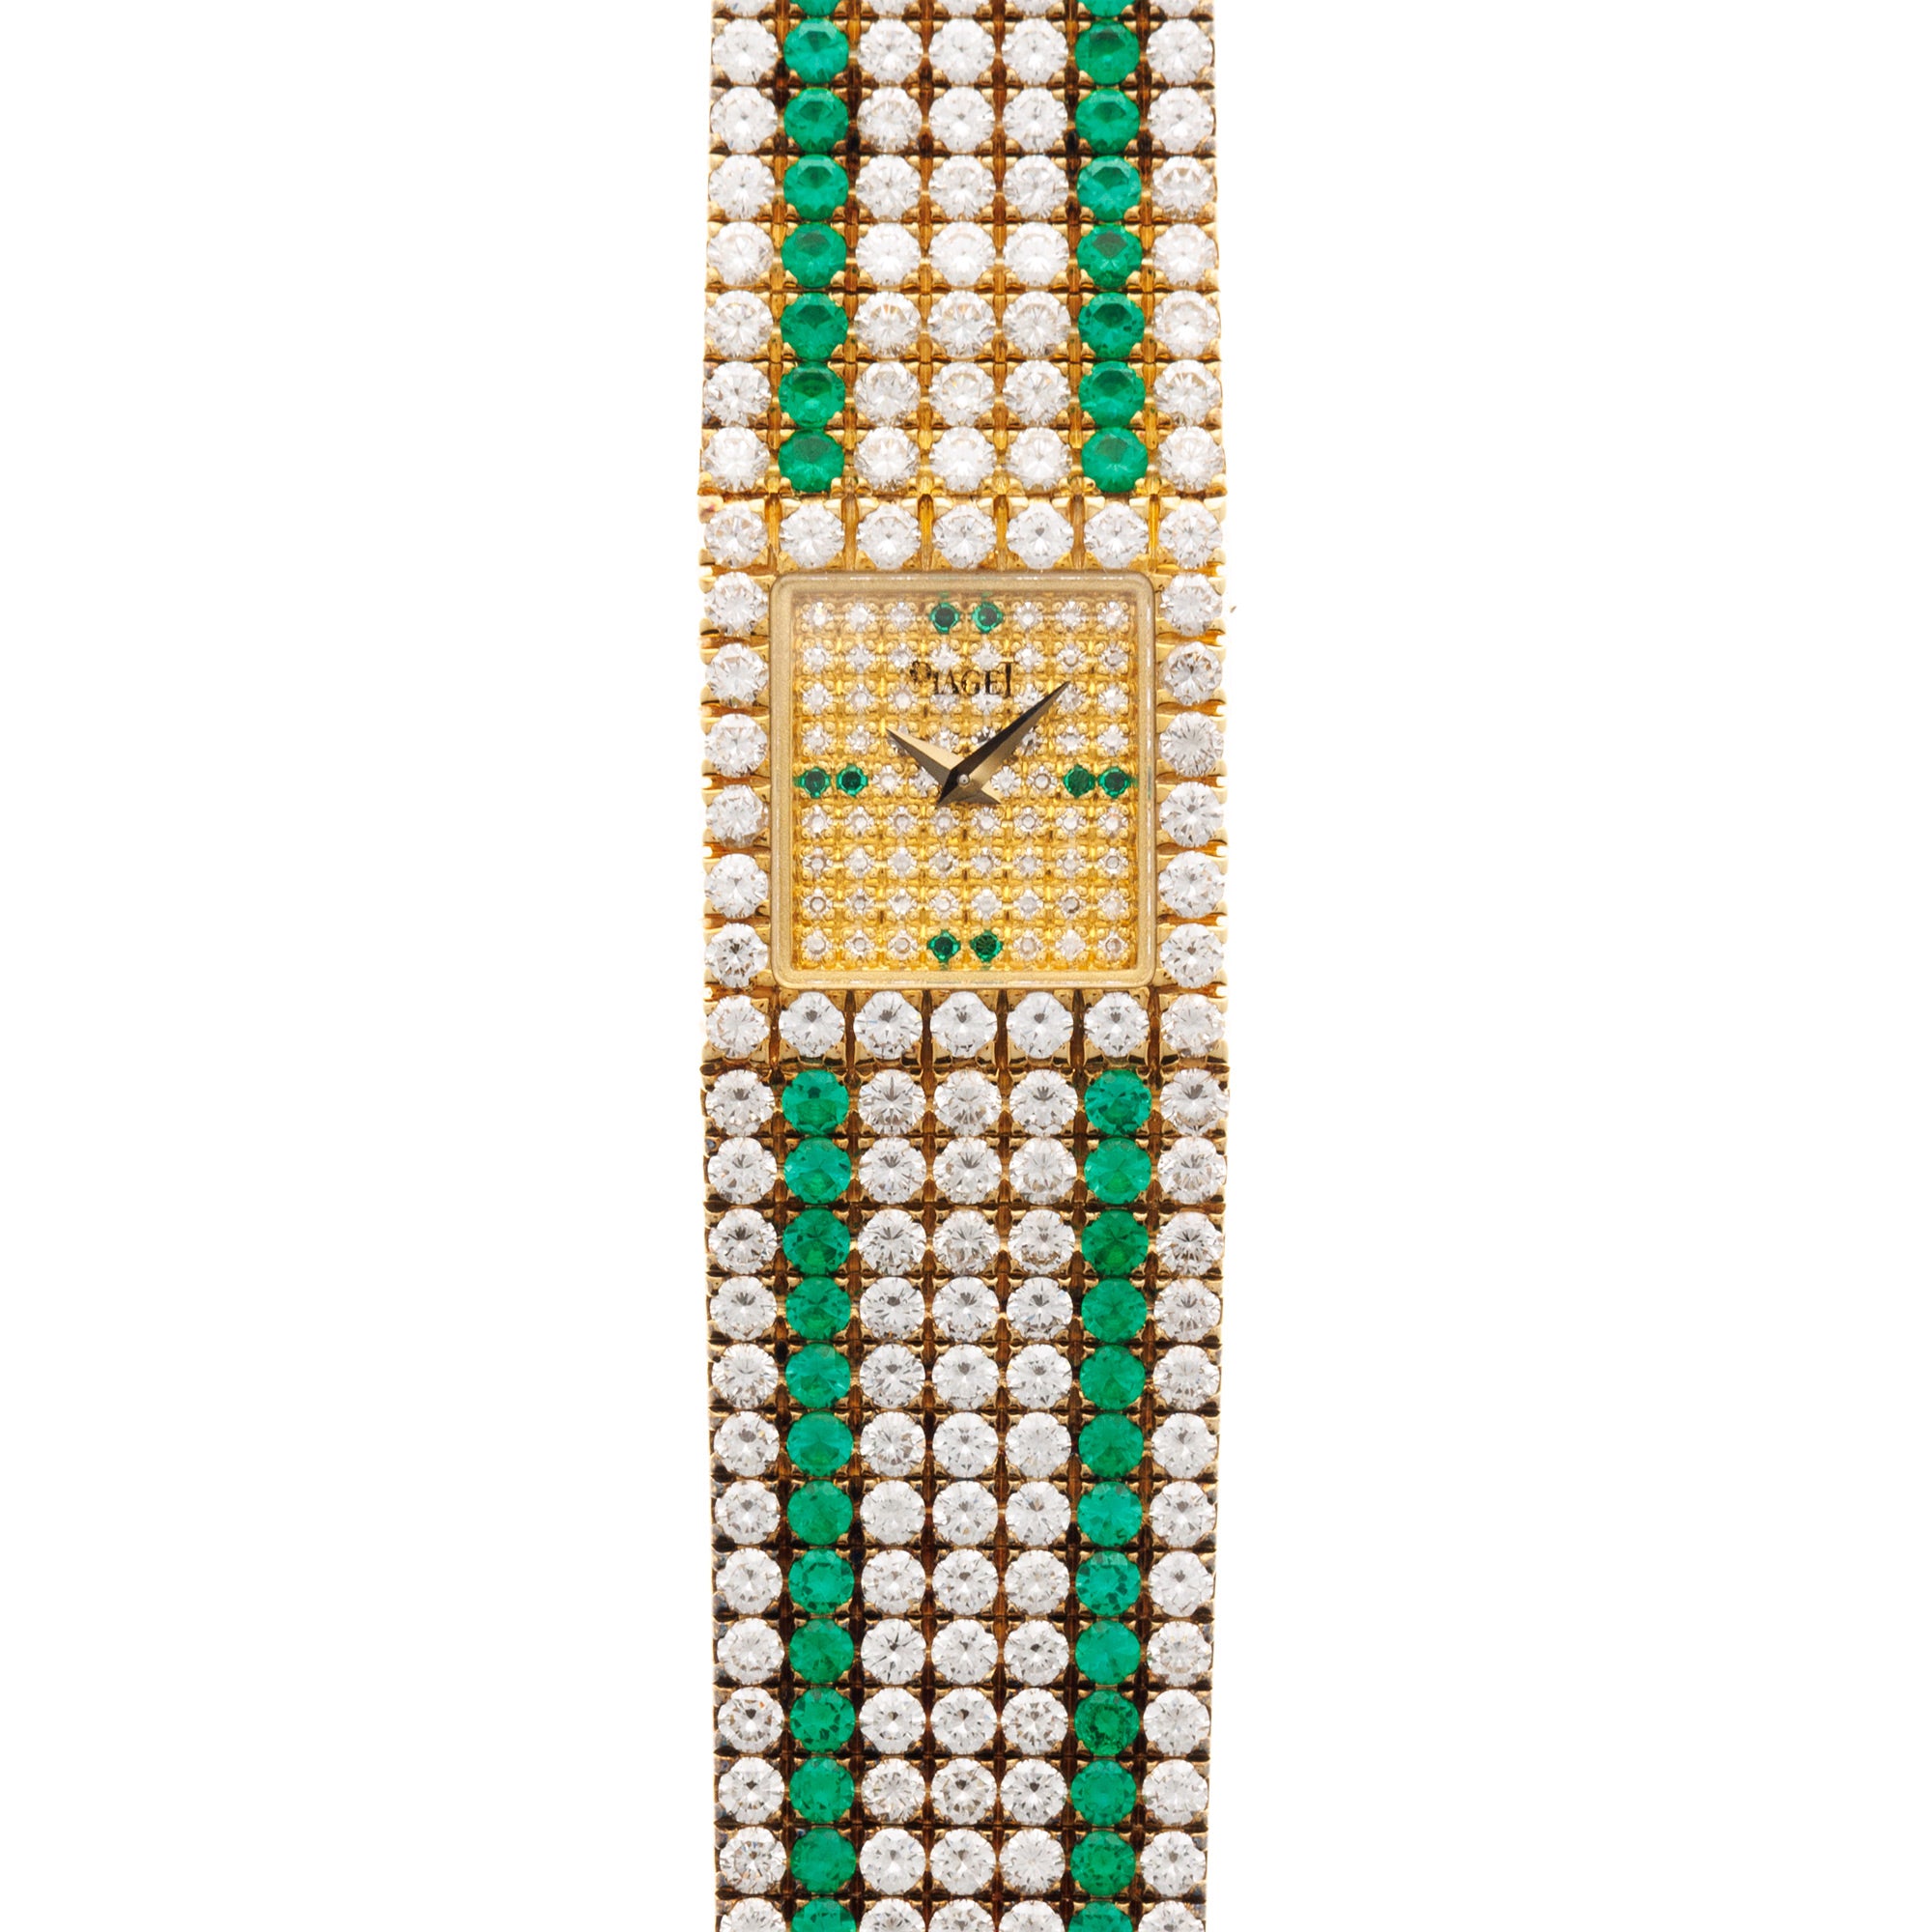 Piaget - Piaget Yellow Gold, Diamond and Emerald Watch Ref. 15301 - The Keystone Watches